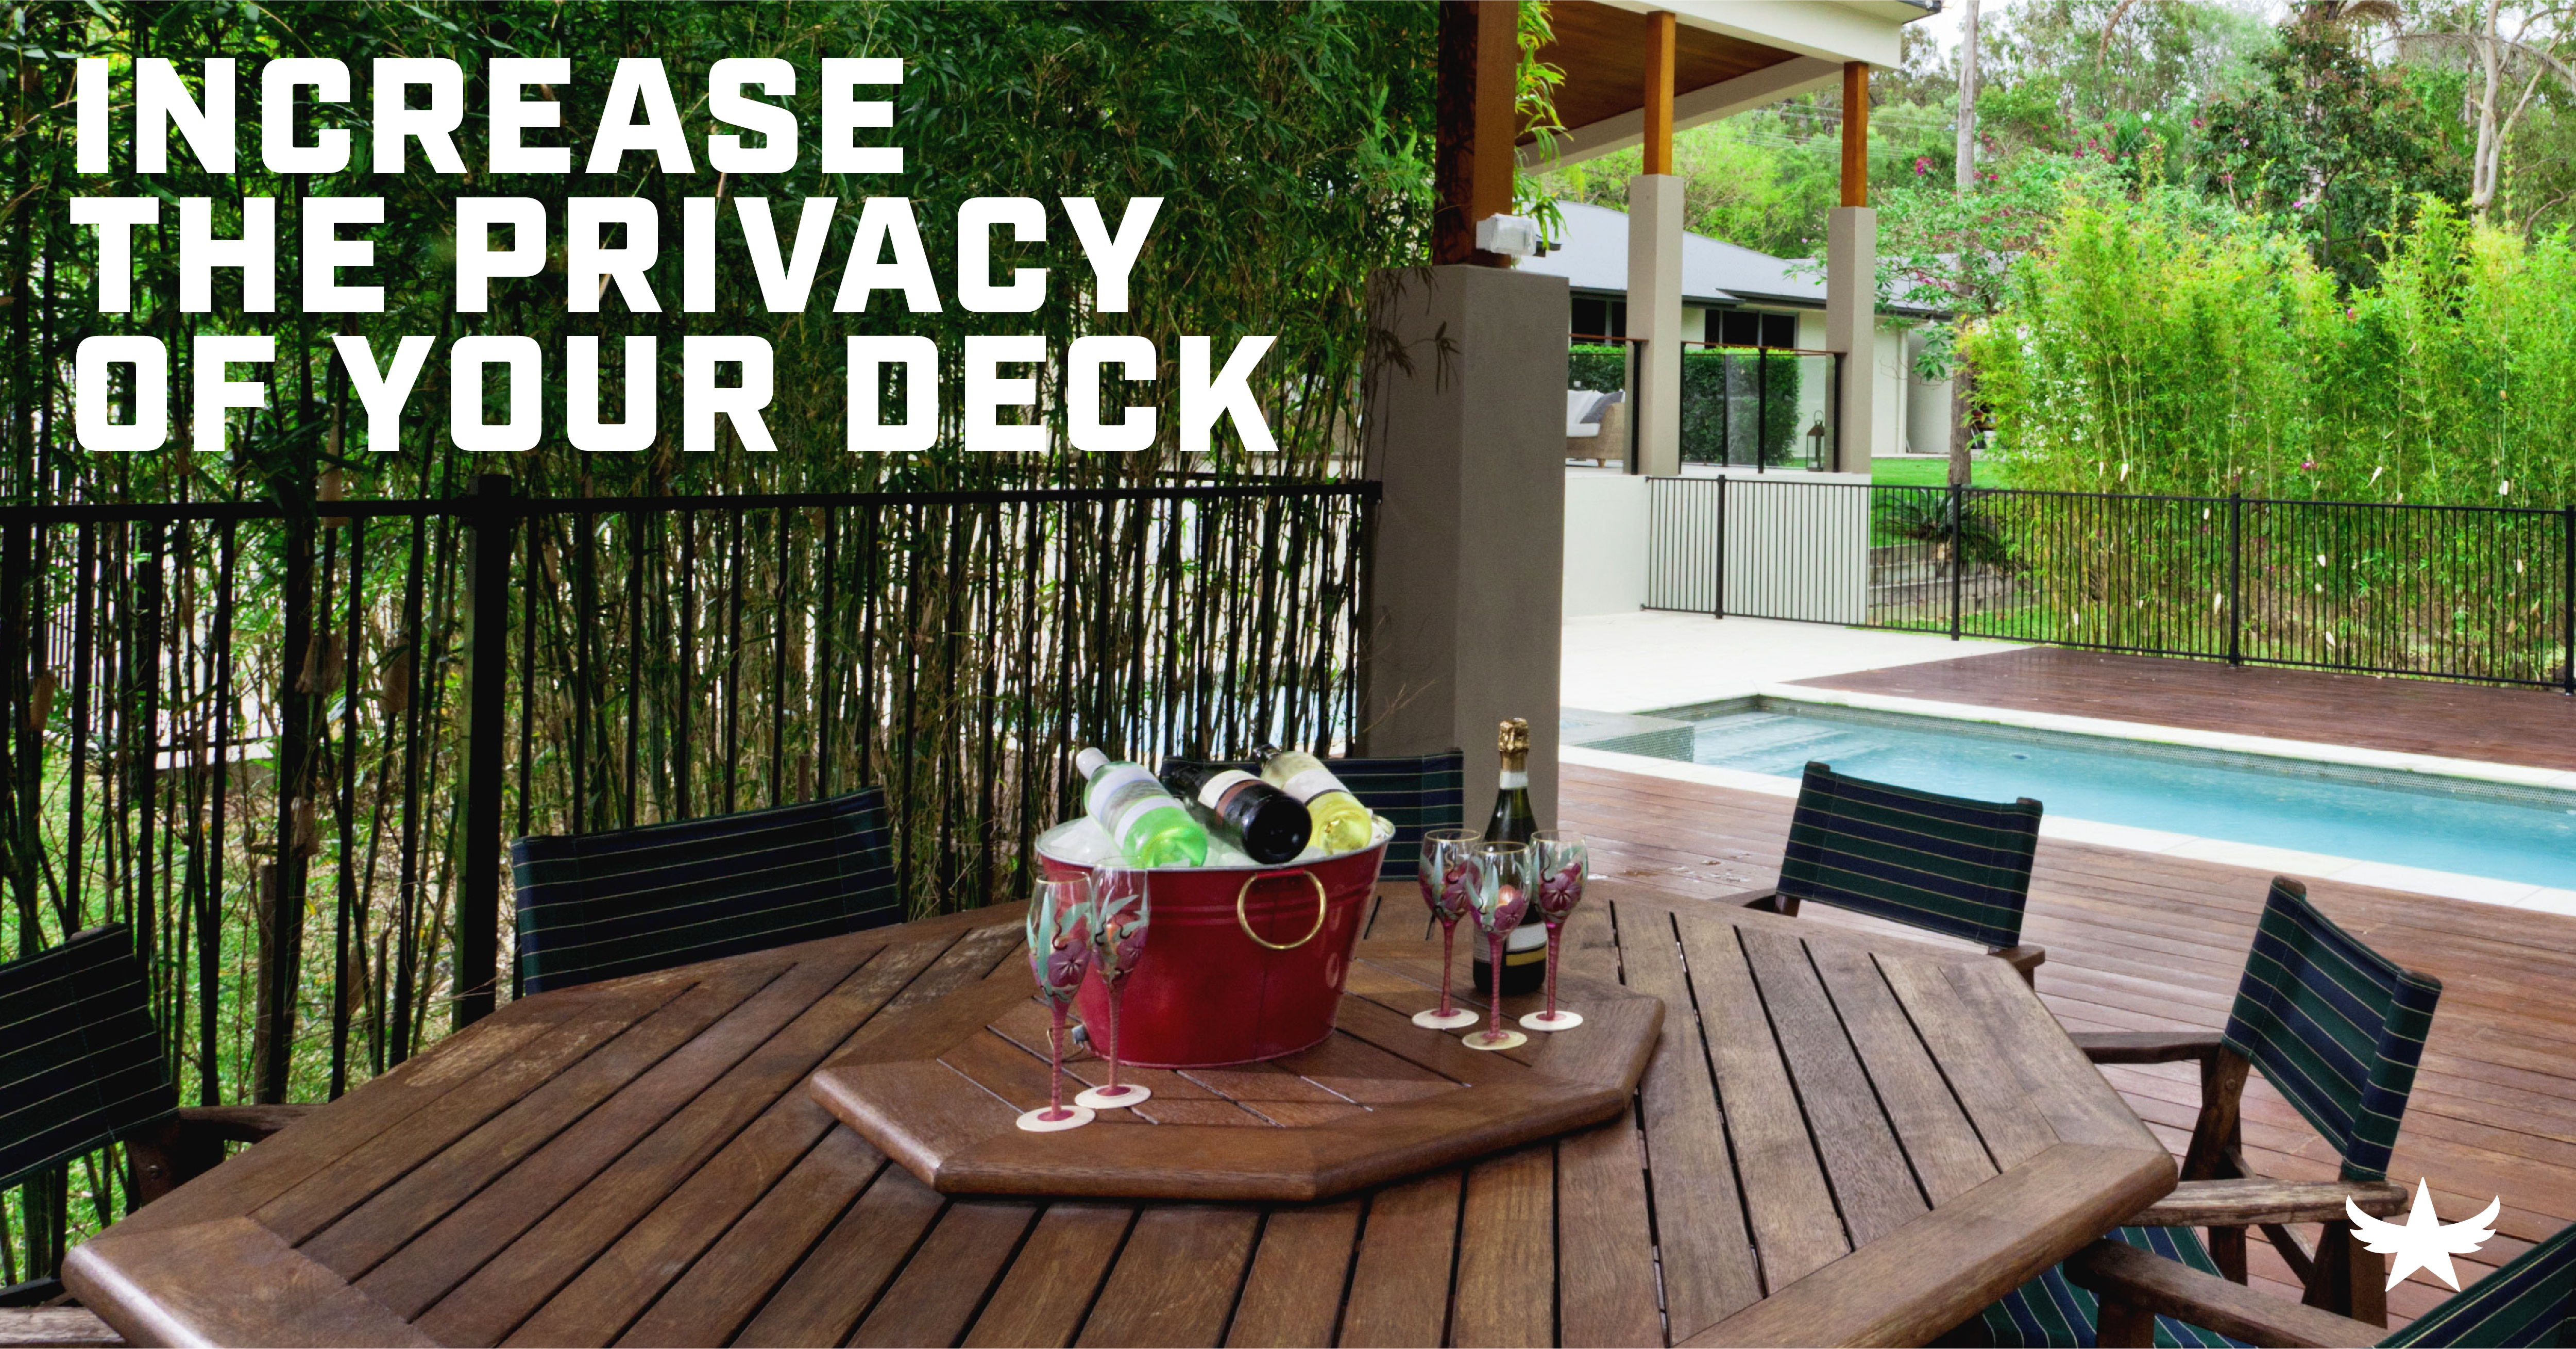 Increase the Privacy of your Deck